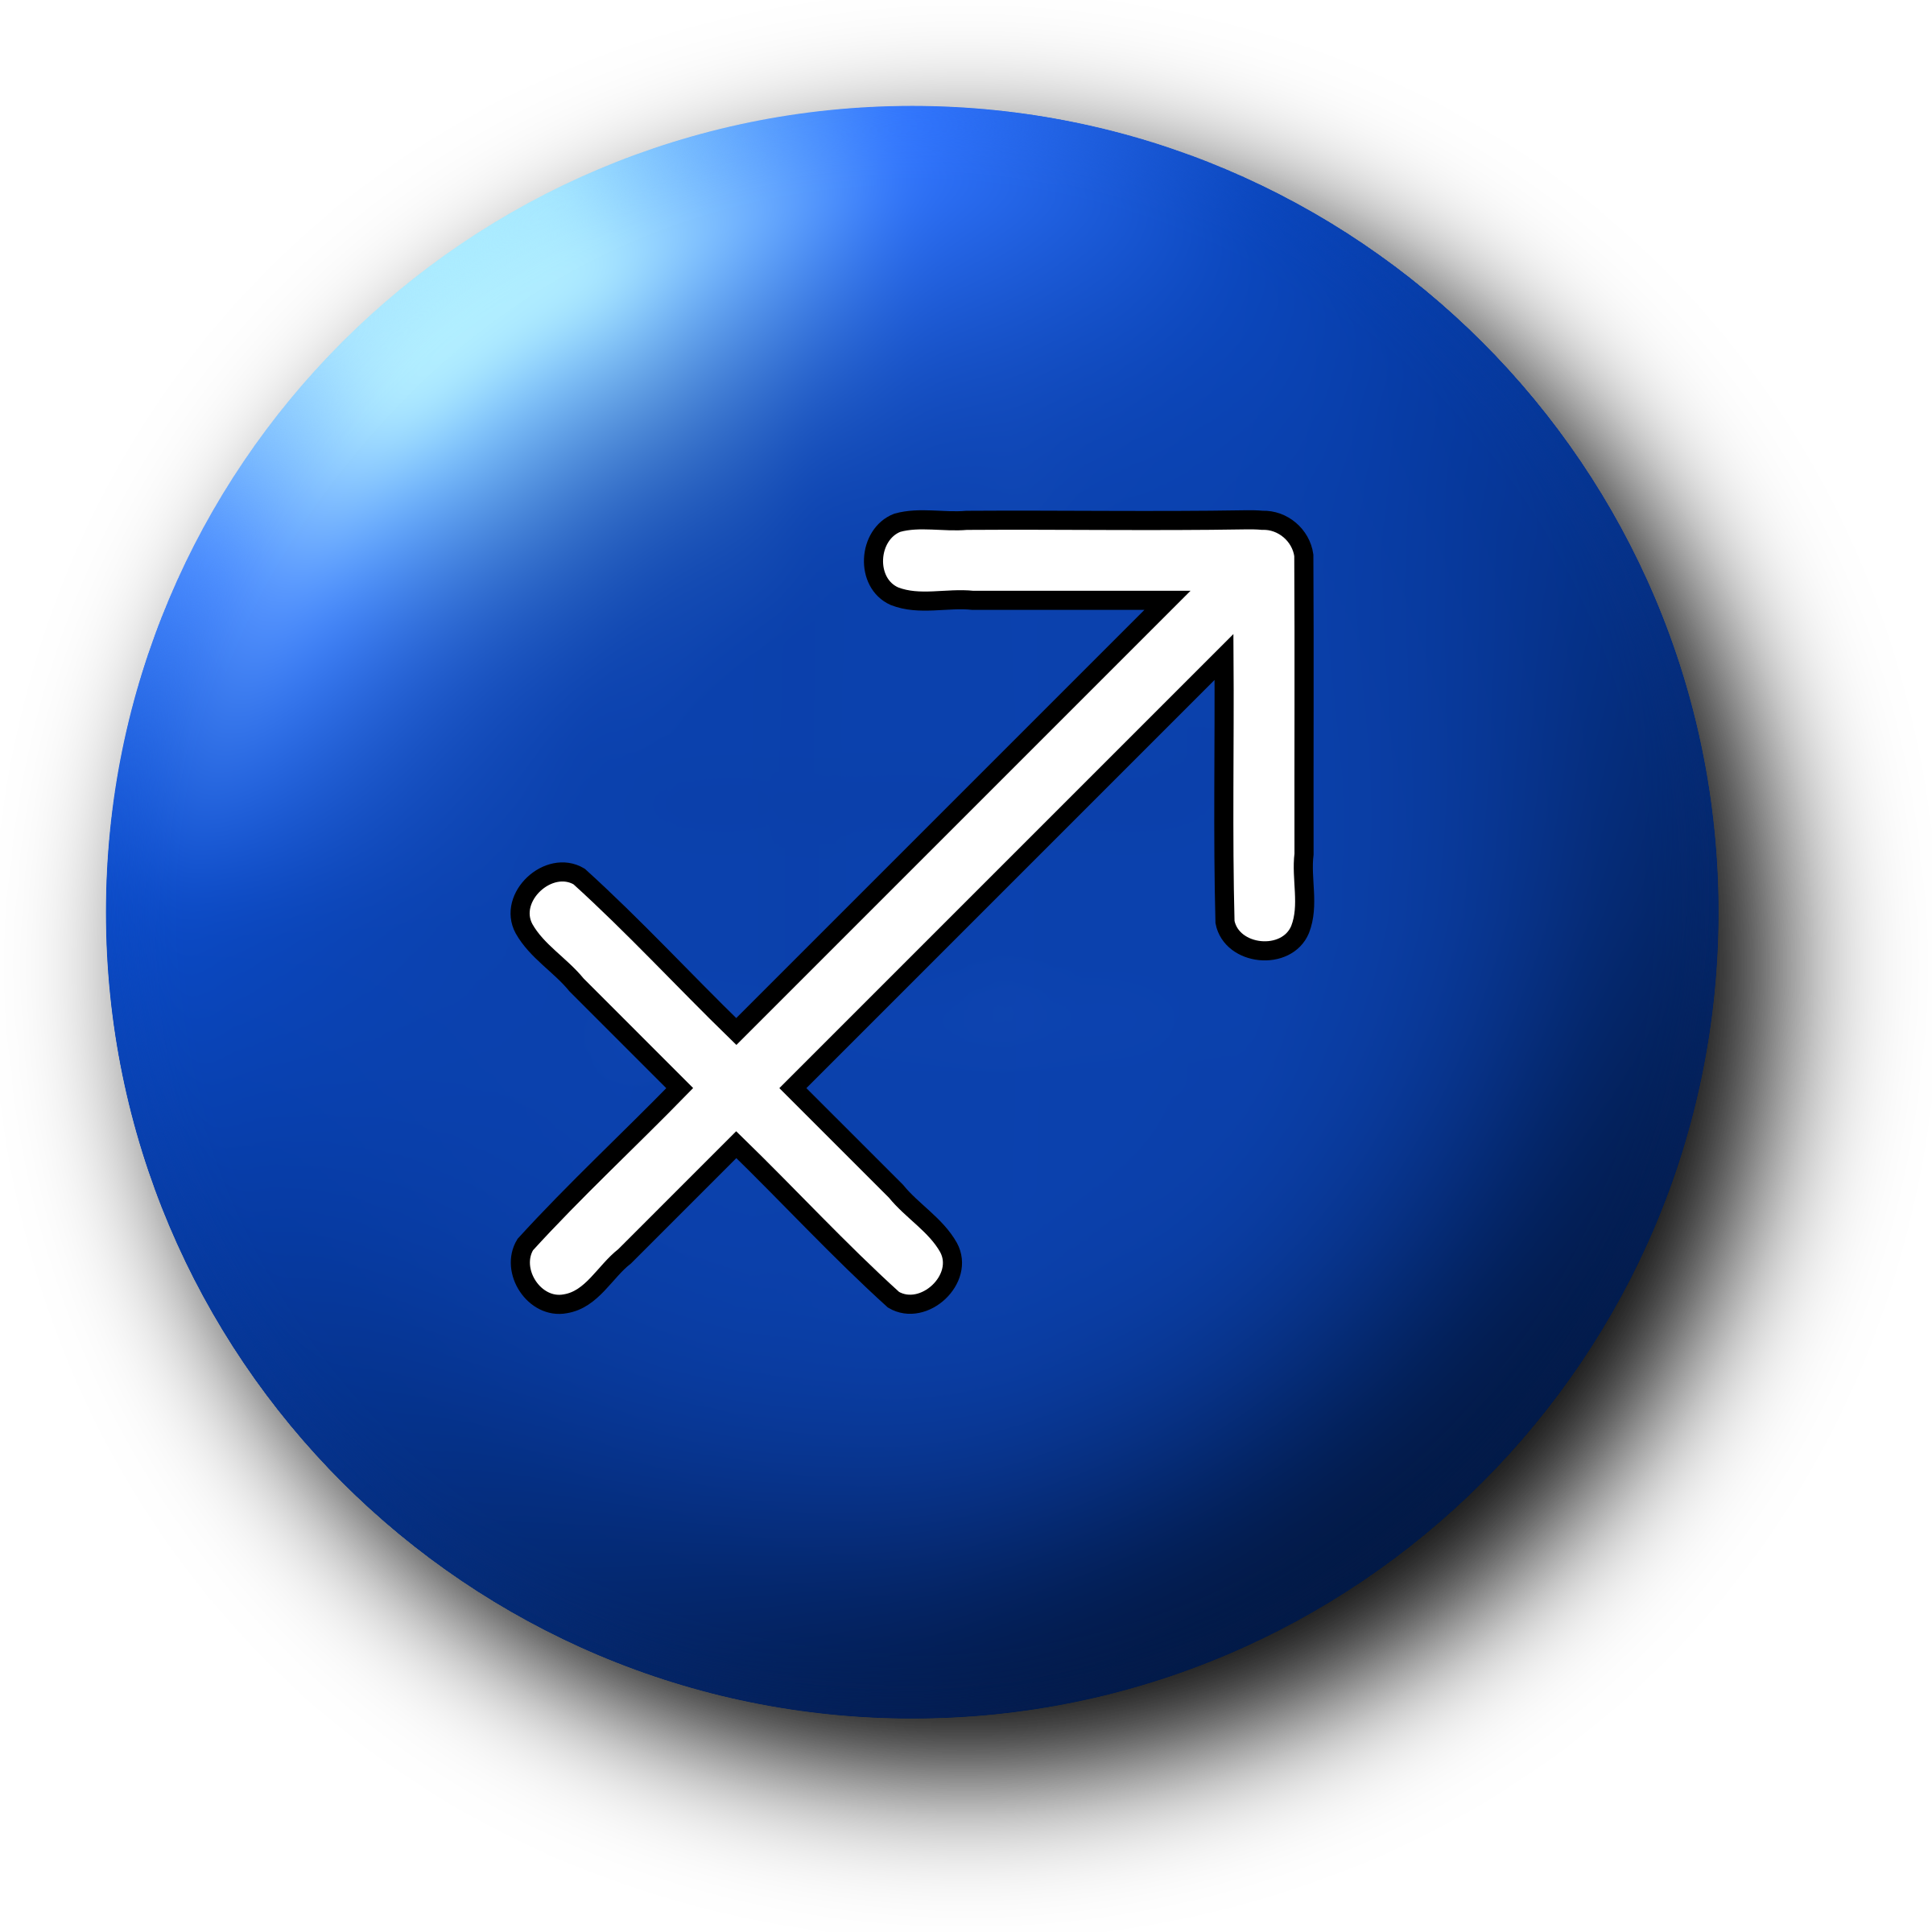 A Blue Circle With A White Symbol On It